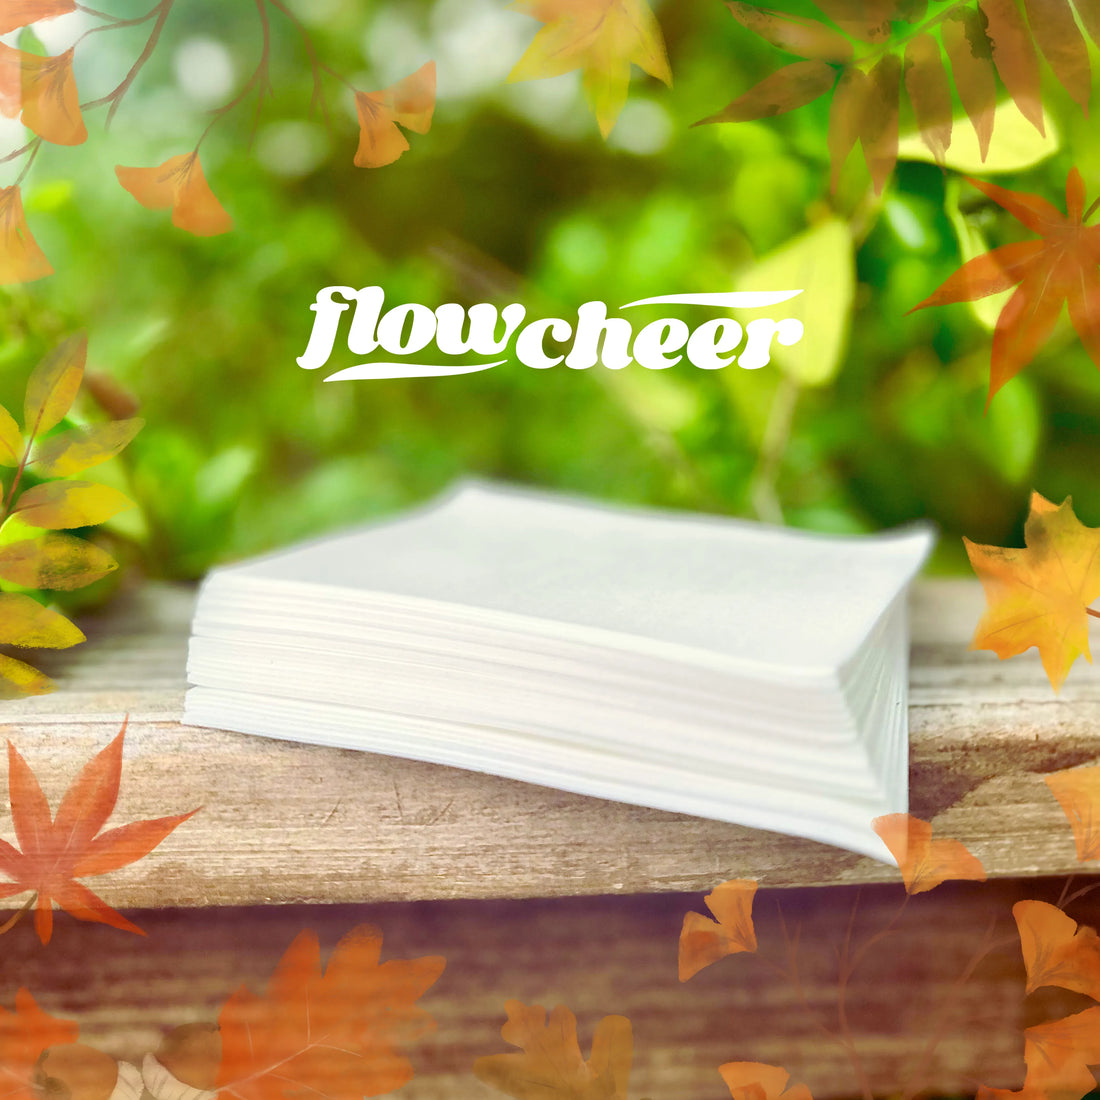 Exploring the Different Types of Laundry Detergents and Their Pros and Cons - Flowcheer